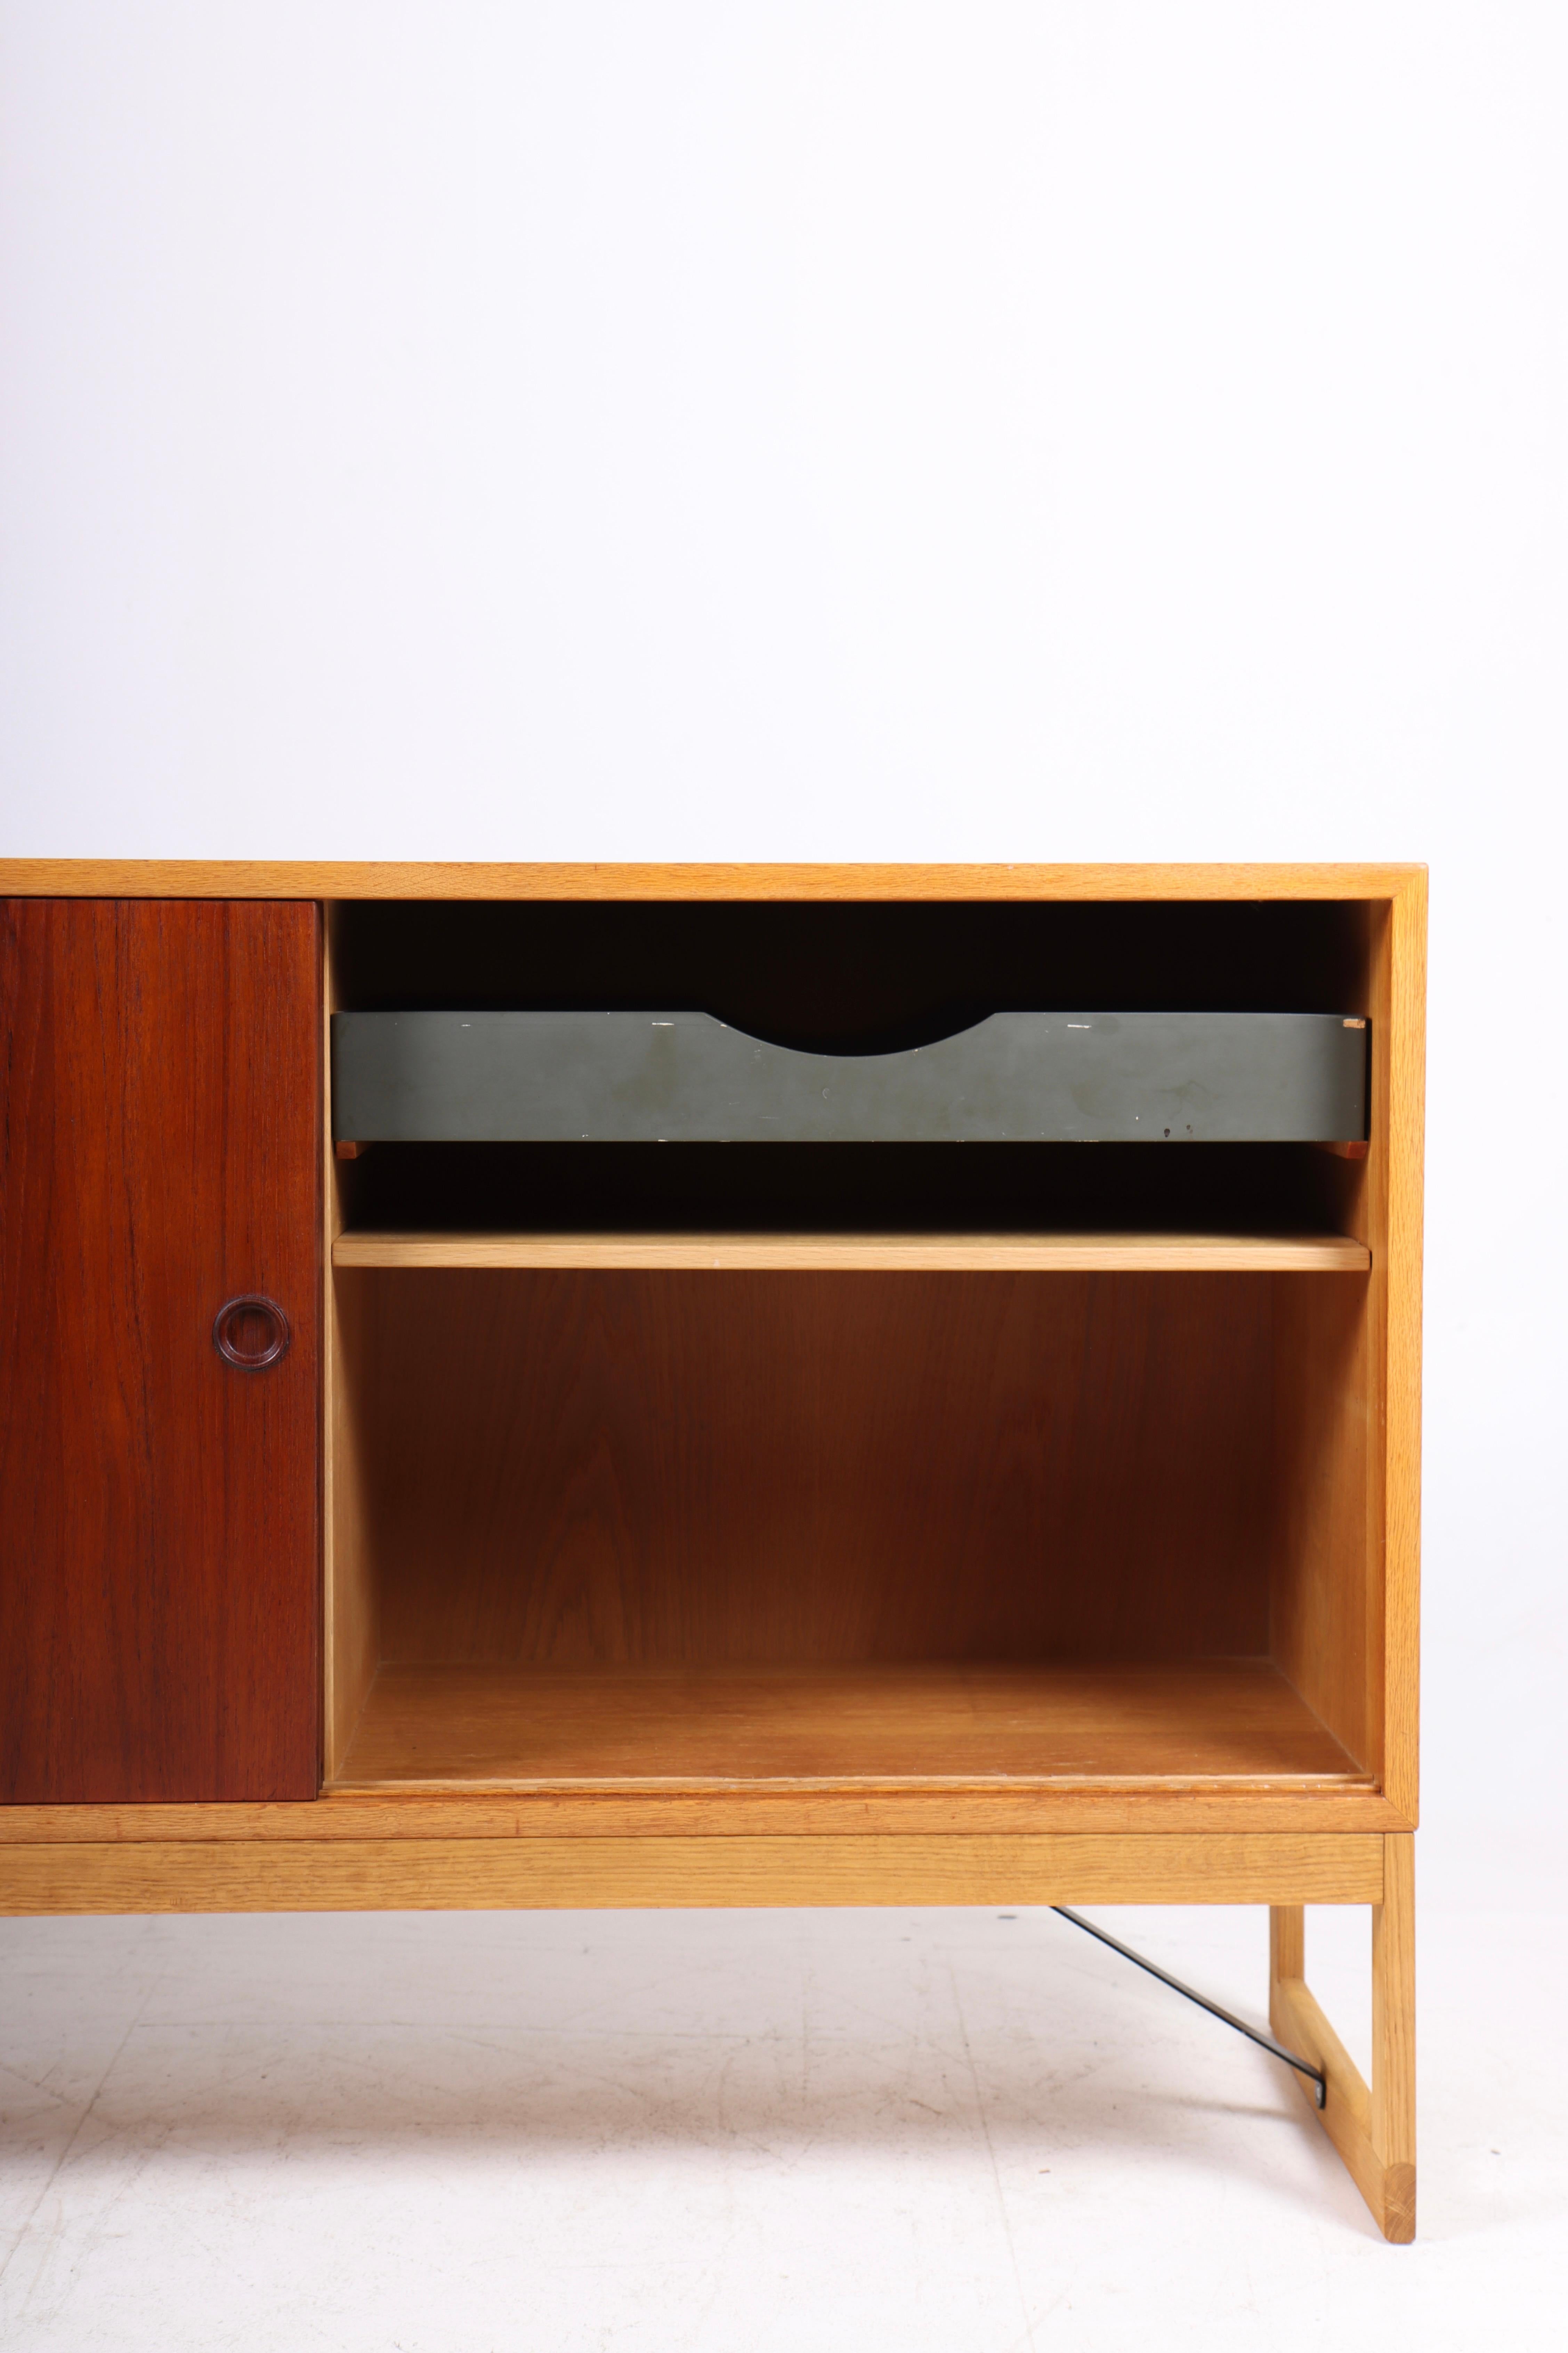 Low cabinet in oak with teak doors. Designed by Danish architect Børge Mogensen for Karl Andersson cabinetmakers. Made in Sweden in the 1960s. Great original condition.